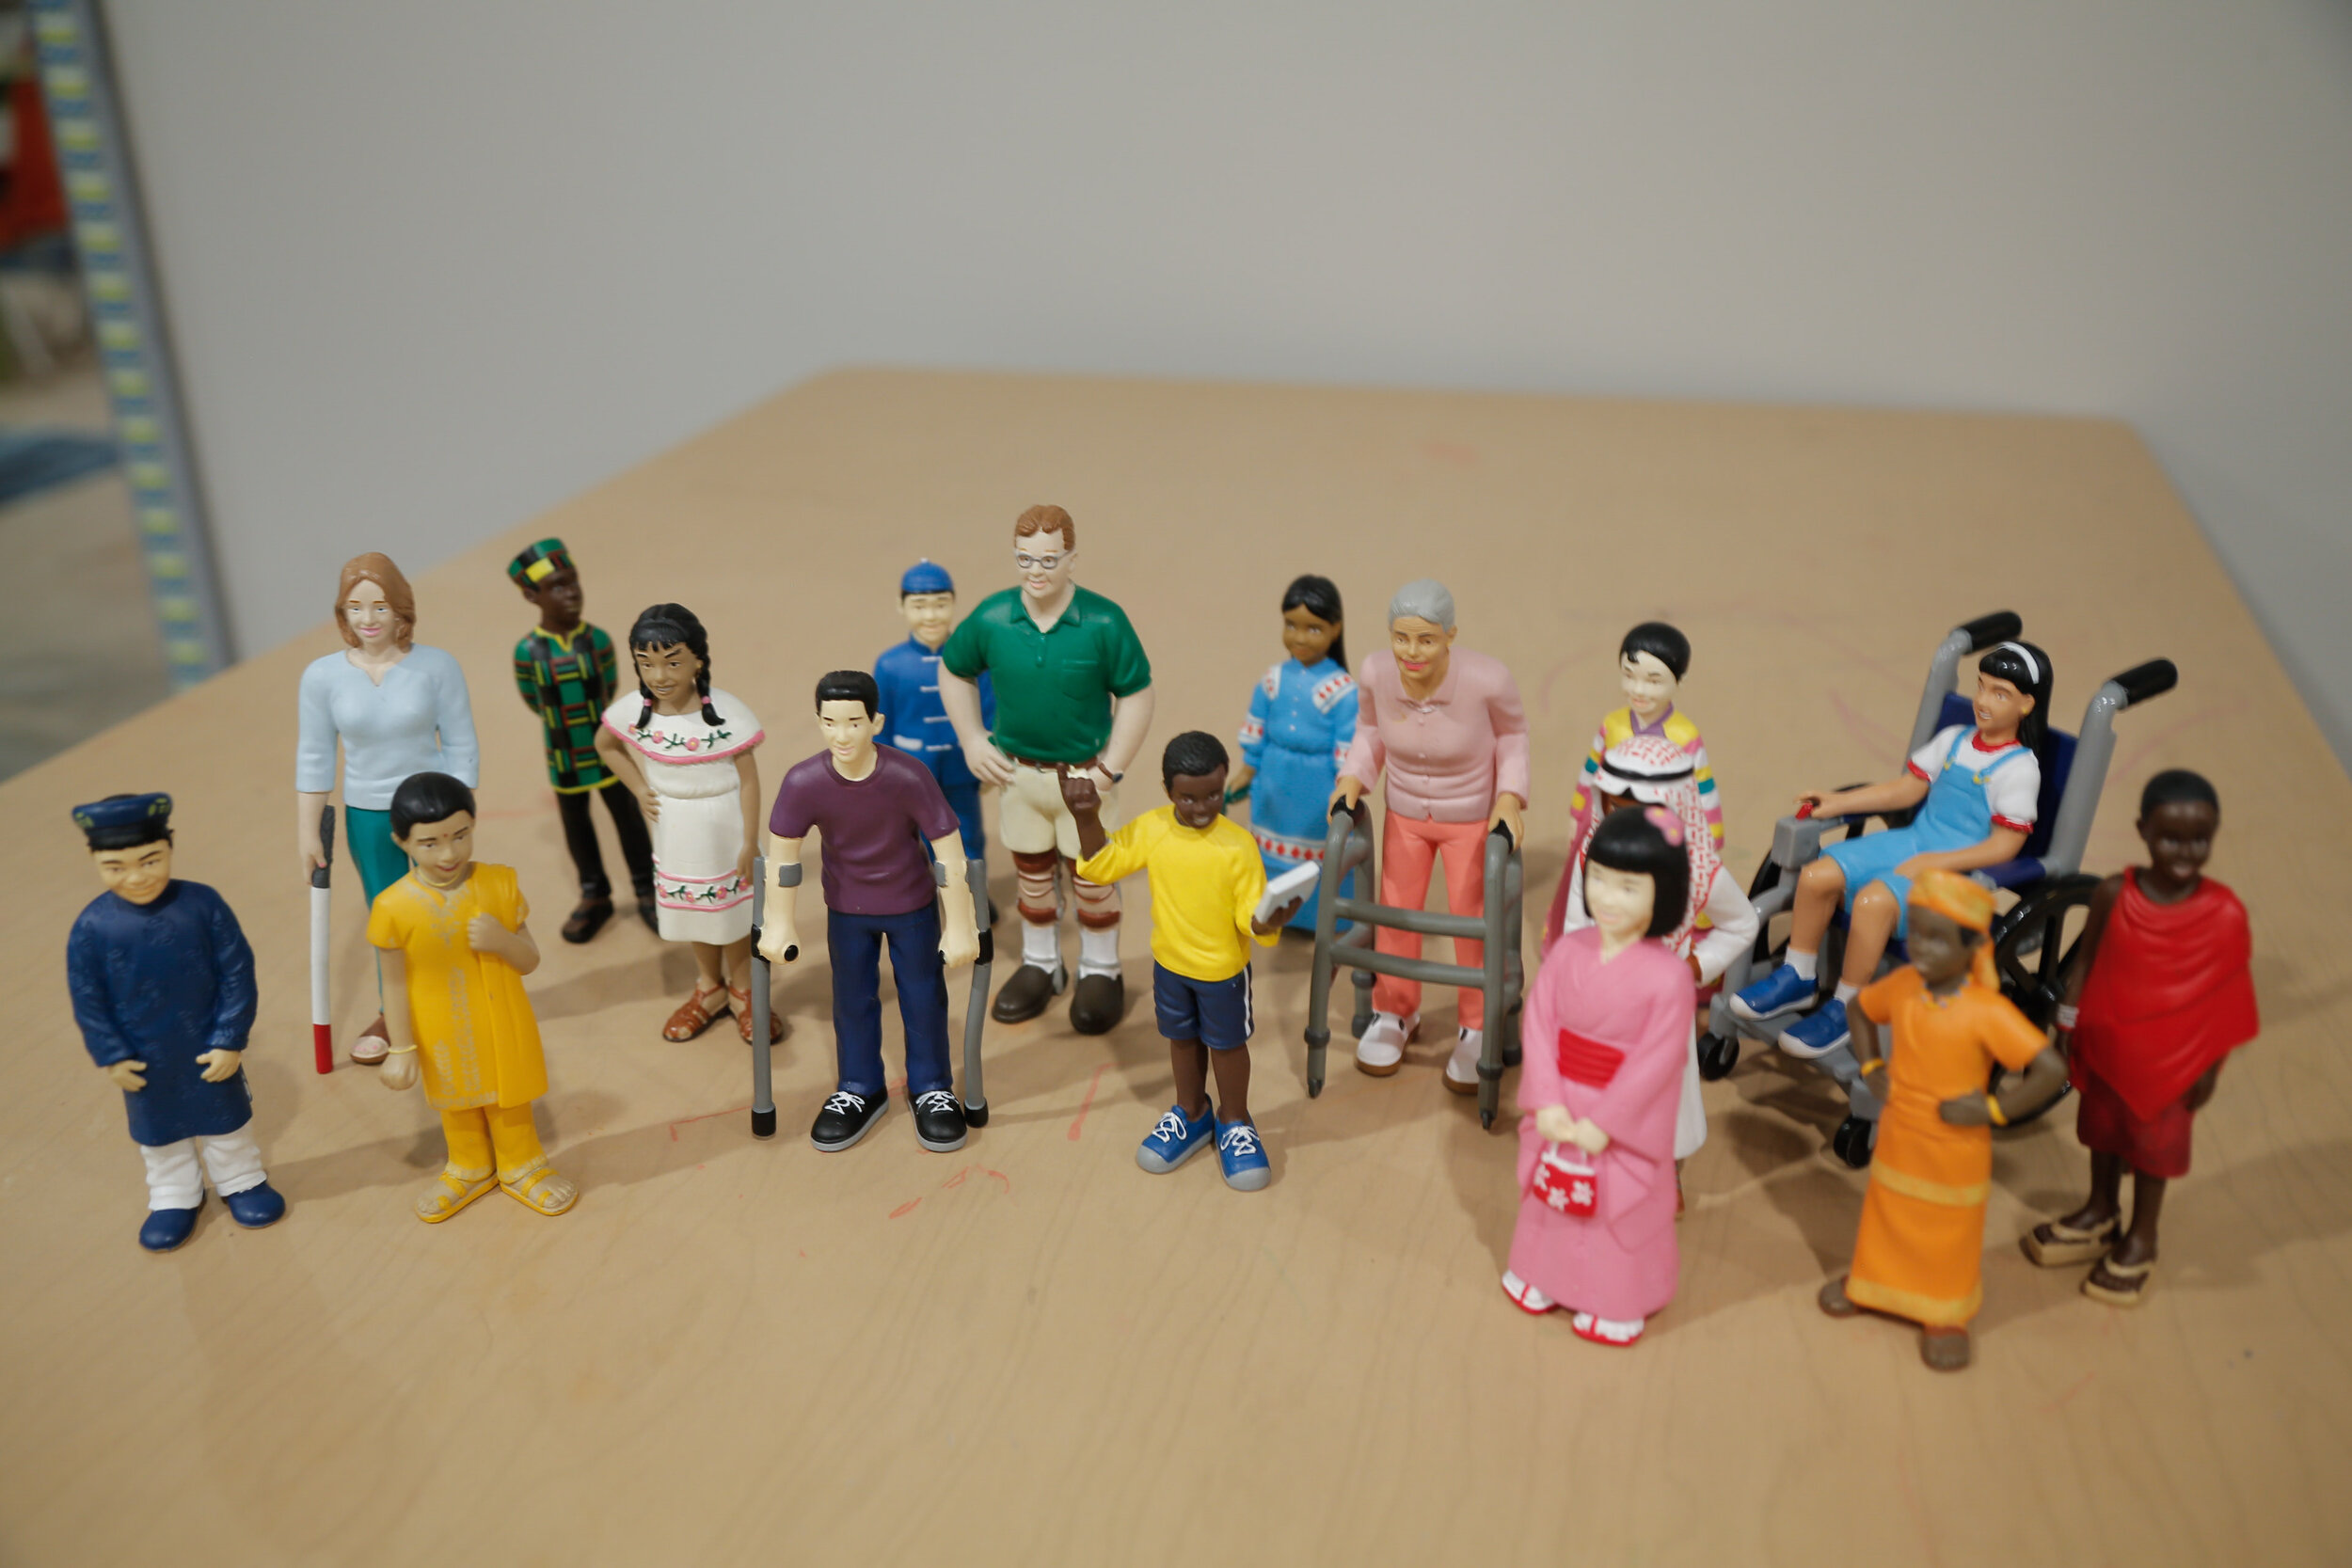  A variety of play dolls from different ethnicities some have mobility aids. 